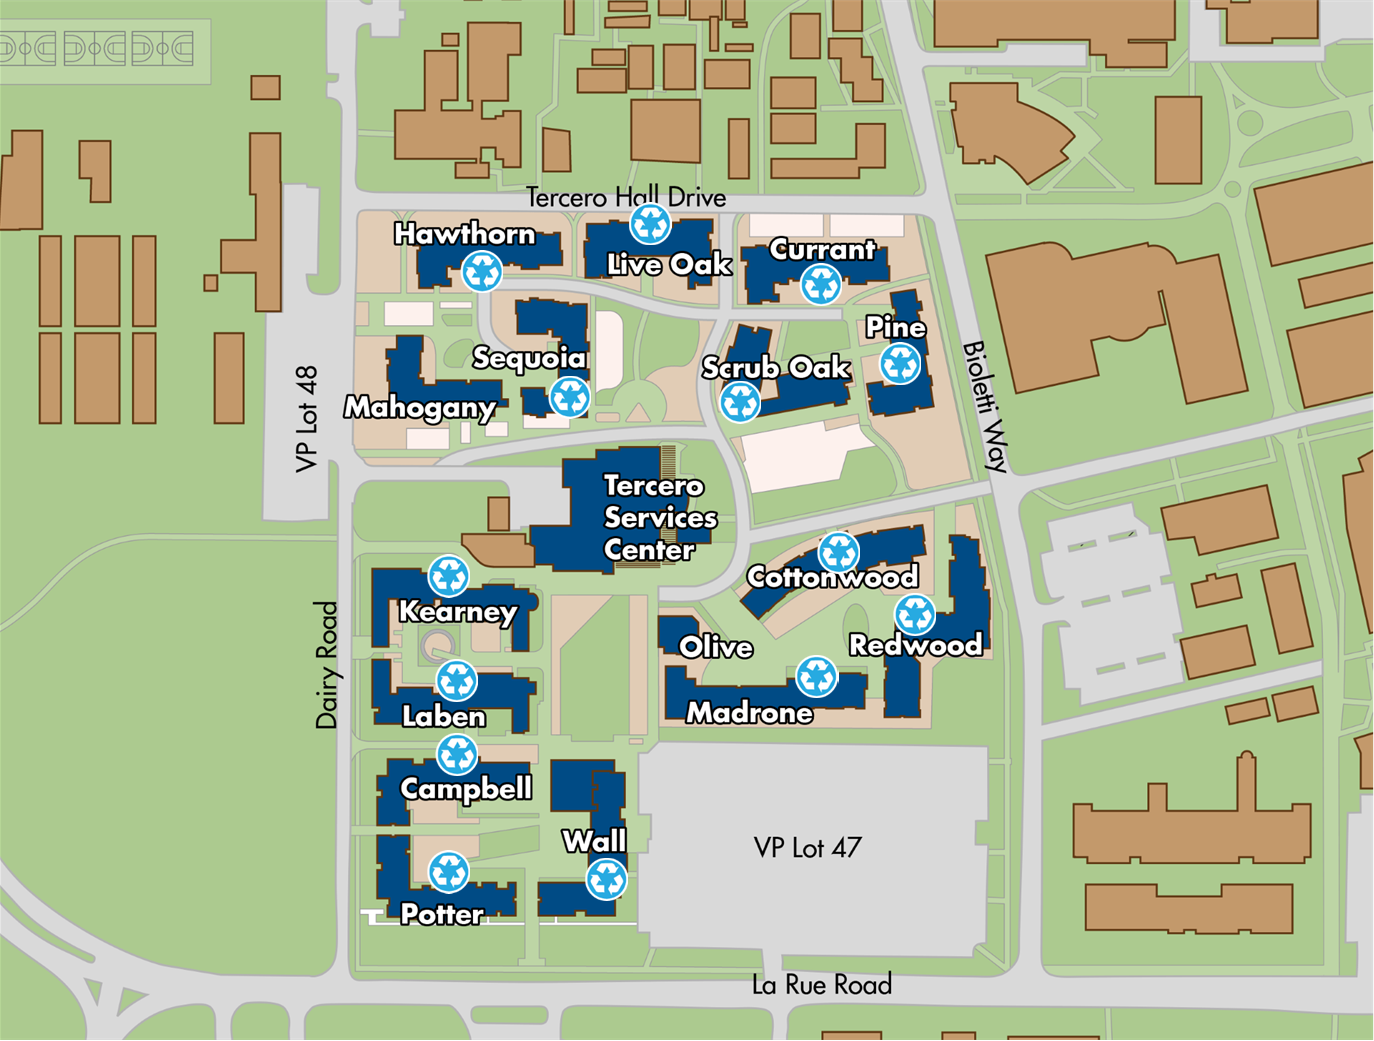 Map: Donation locations are available in Alder, Thompson, Miller, Bixby, Gilmore, Malcolm, and Ryerson residence halls, and in Regan Main and Spruce at Primero Grove.